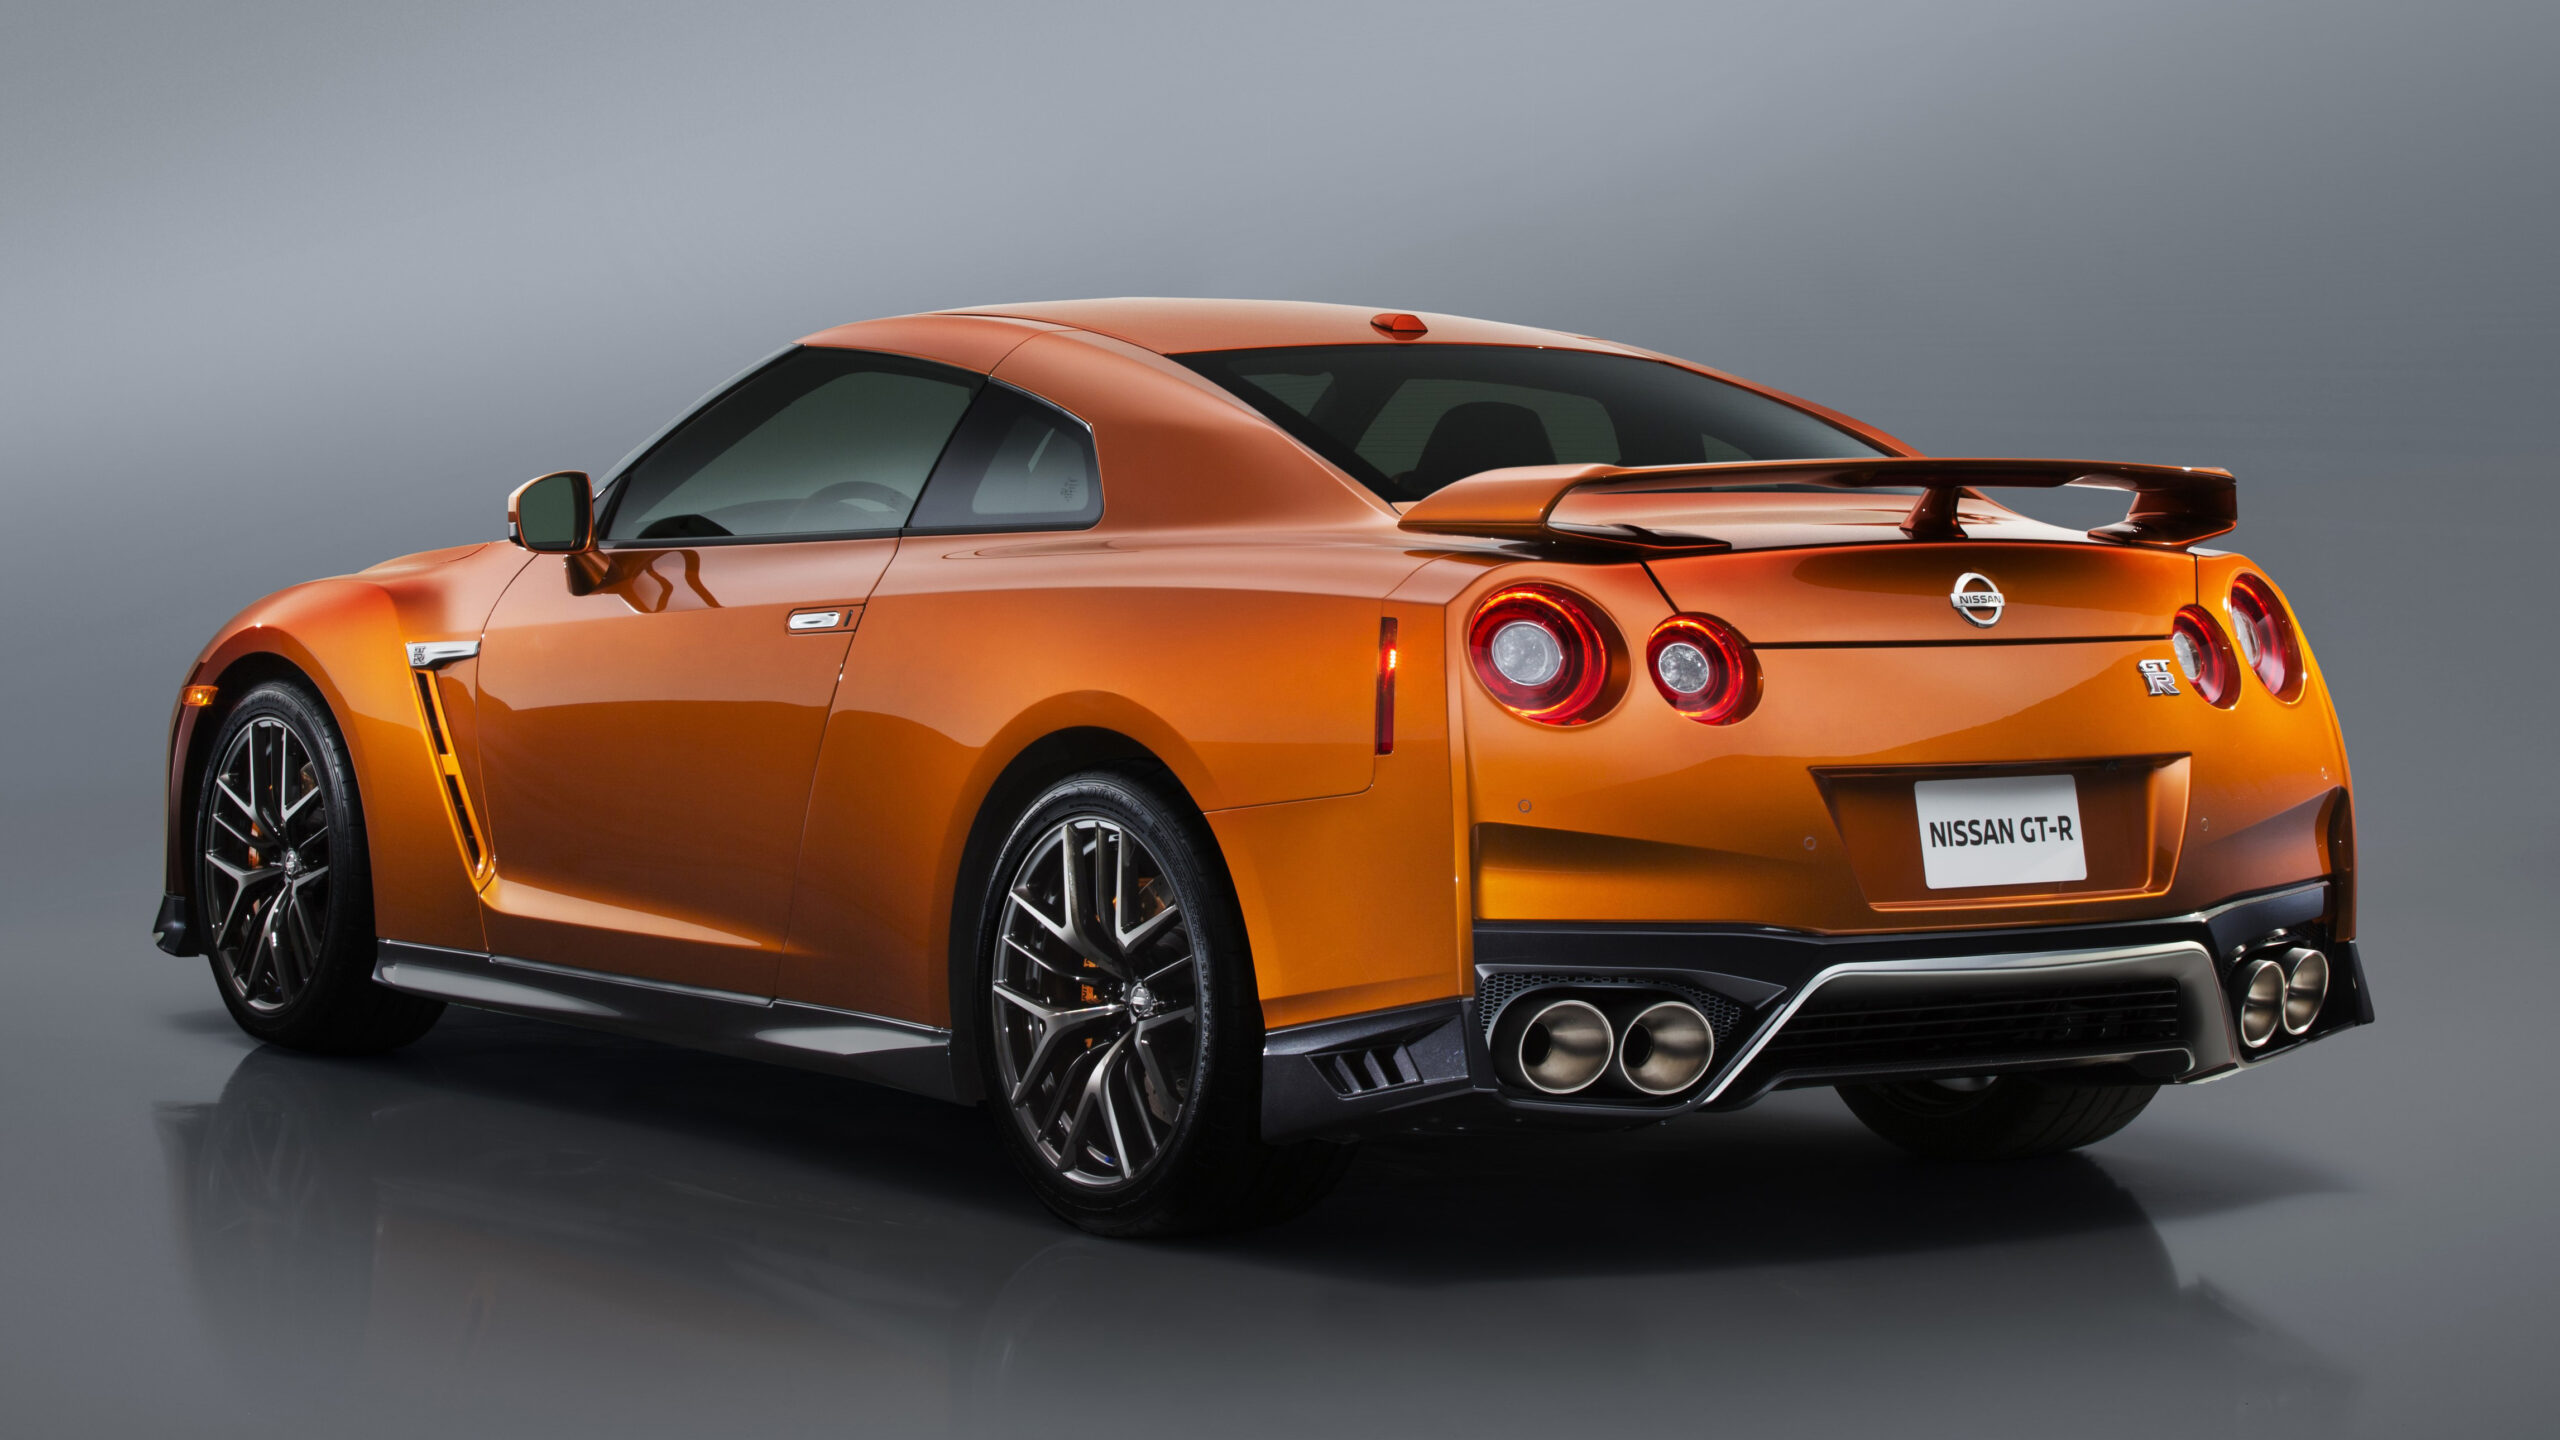 A vibrant orange Nissan GT-R, a powerful and iconic sports car, showcasing its striking design and performance prowess.